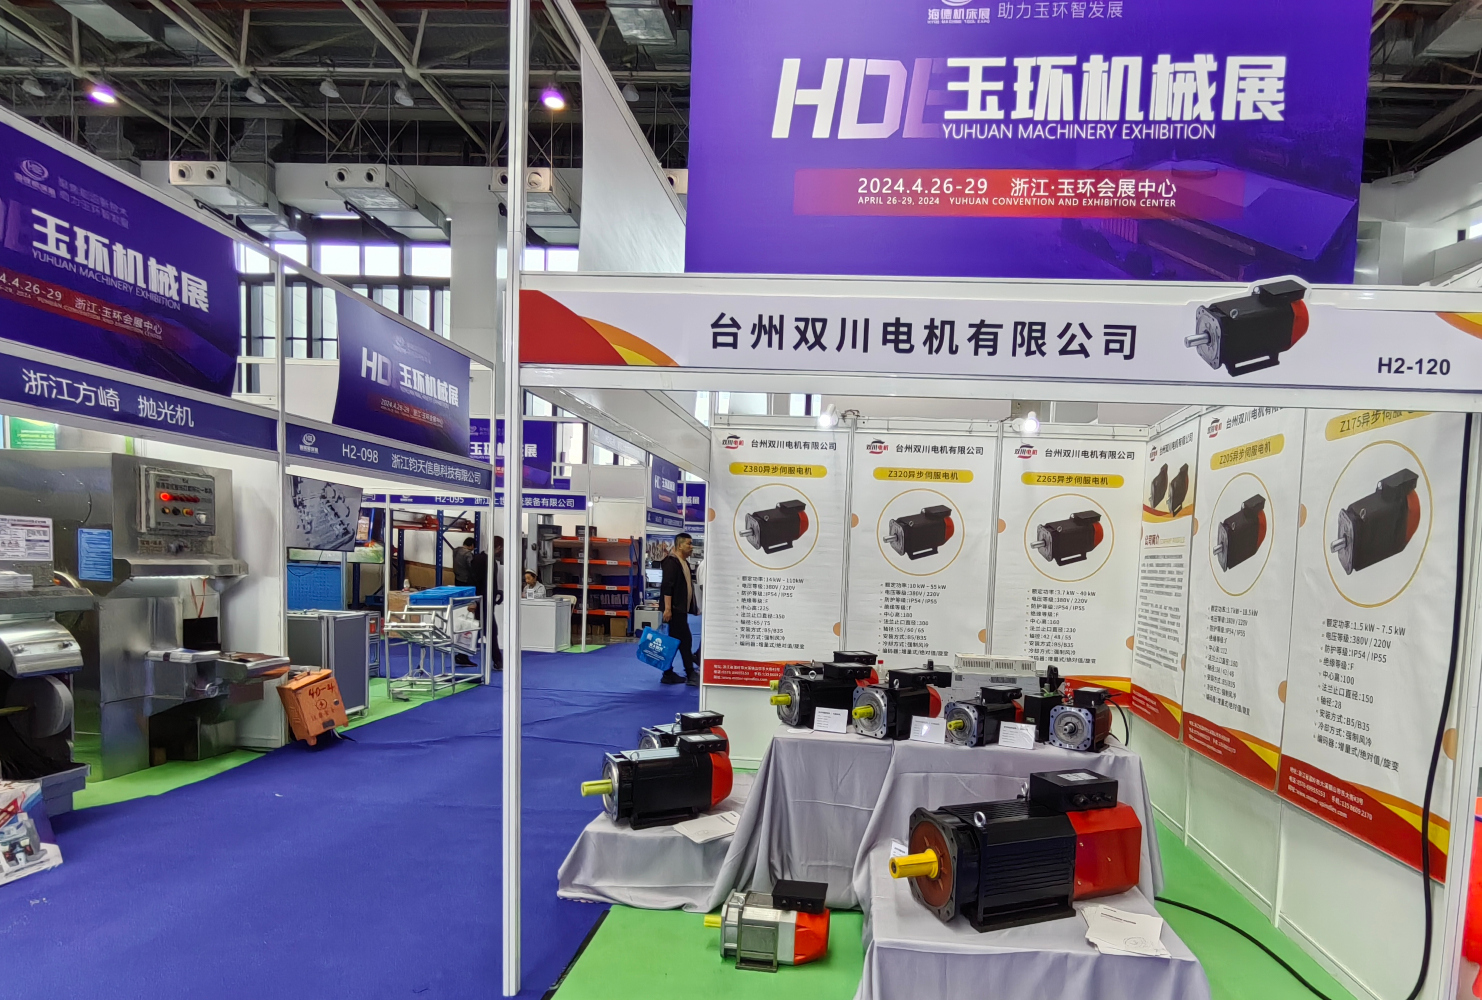 The 17th Yuhuan Machinery Exhibition 